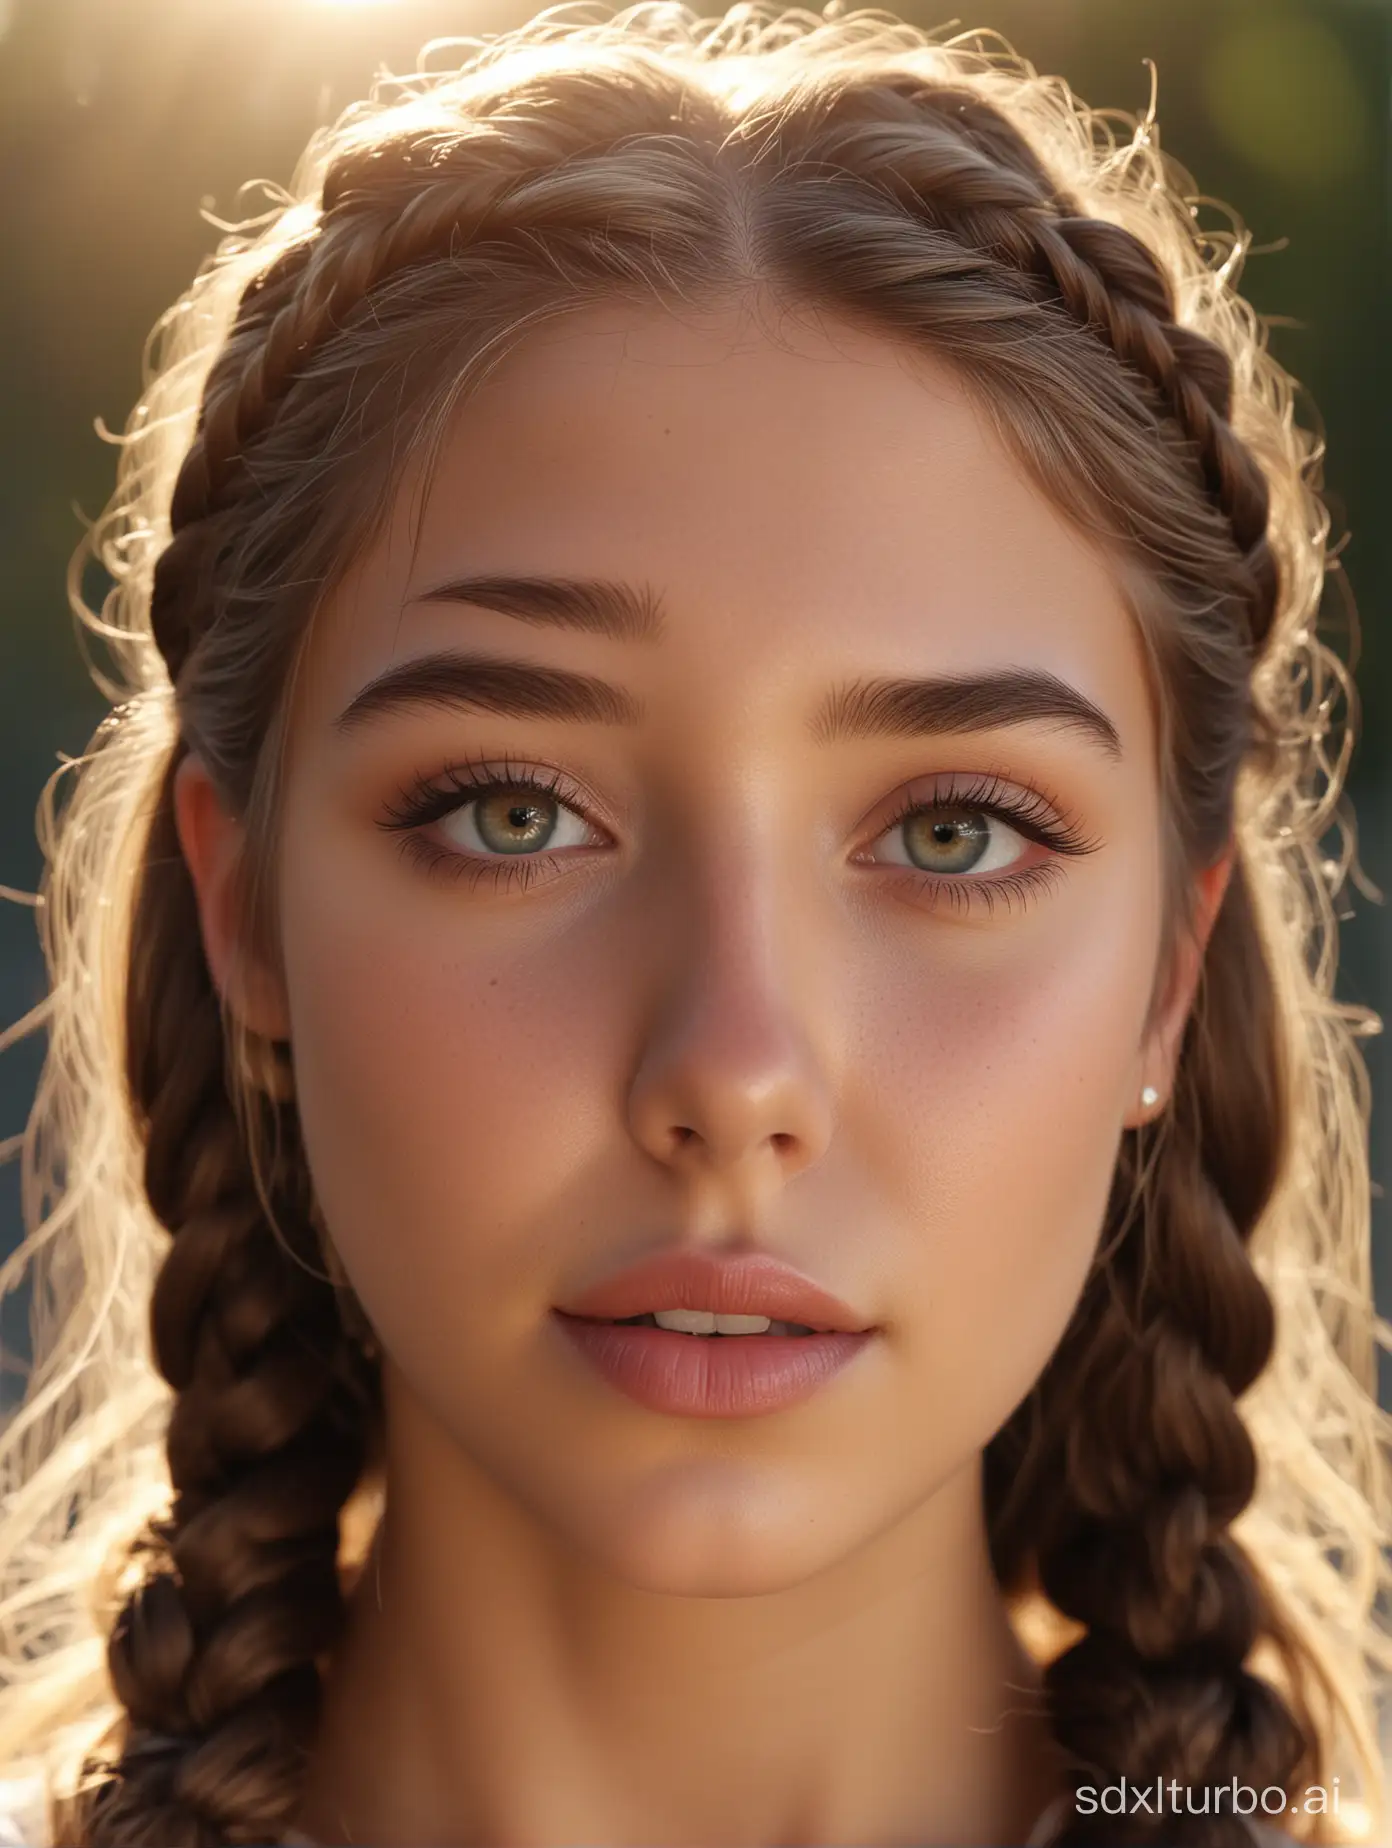 4K, highly realistic detailed professional photograph portrait of a stunningly beautiful teen girl, gorgeous eyes, cute nose, full lips, perfect teeth, crown braids, high cheek bones, radiant hair backlit by the sun